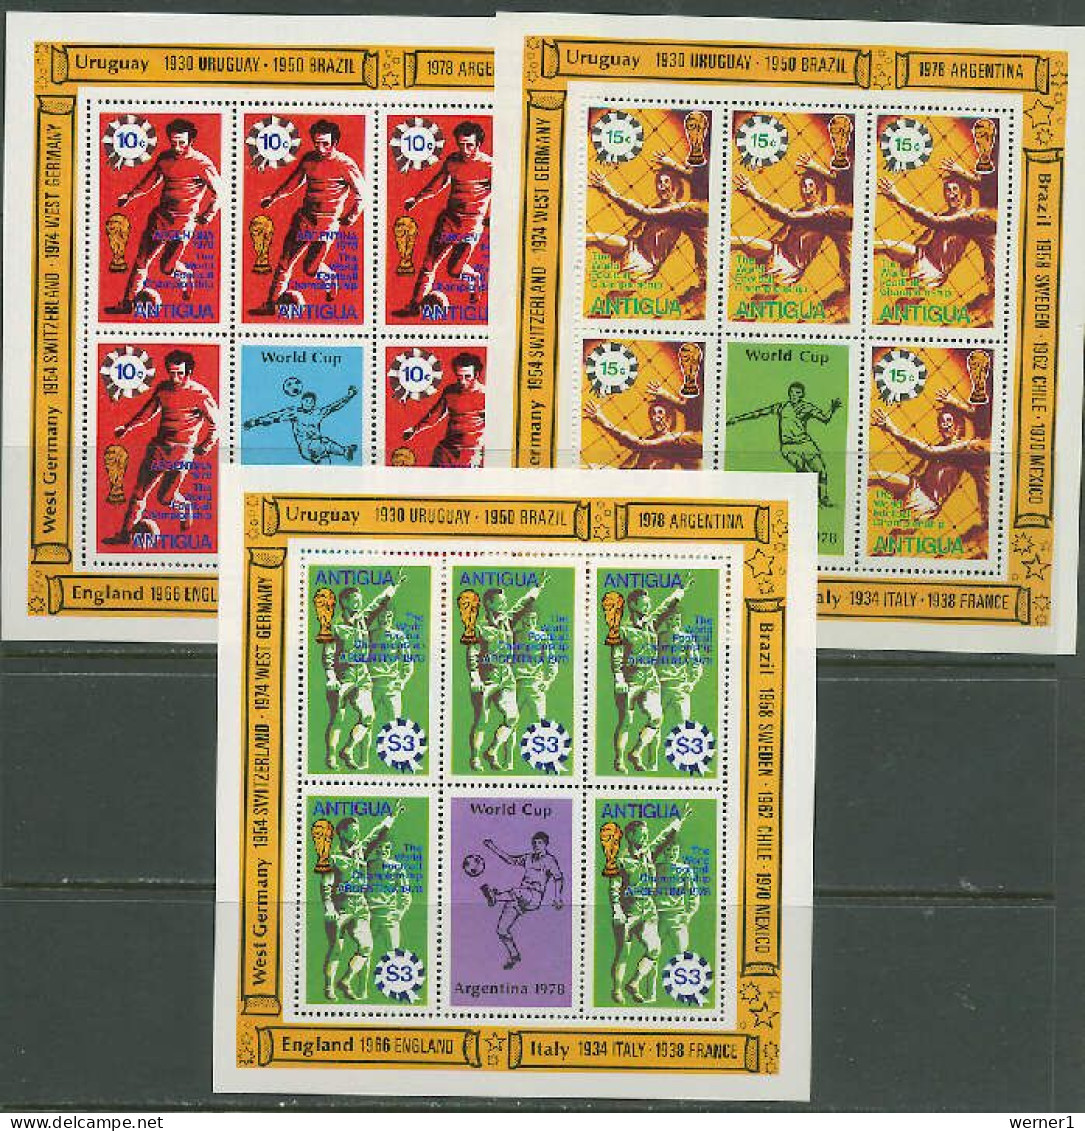 Antigua 1978 Football Soccer World Cup Set Of 3 Sheetlets MNH - 1978 – Argentine